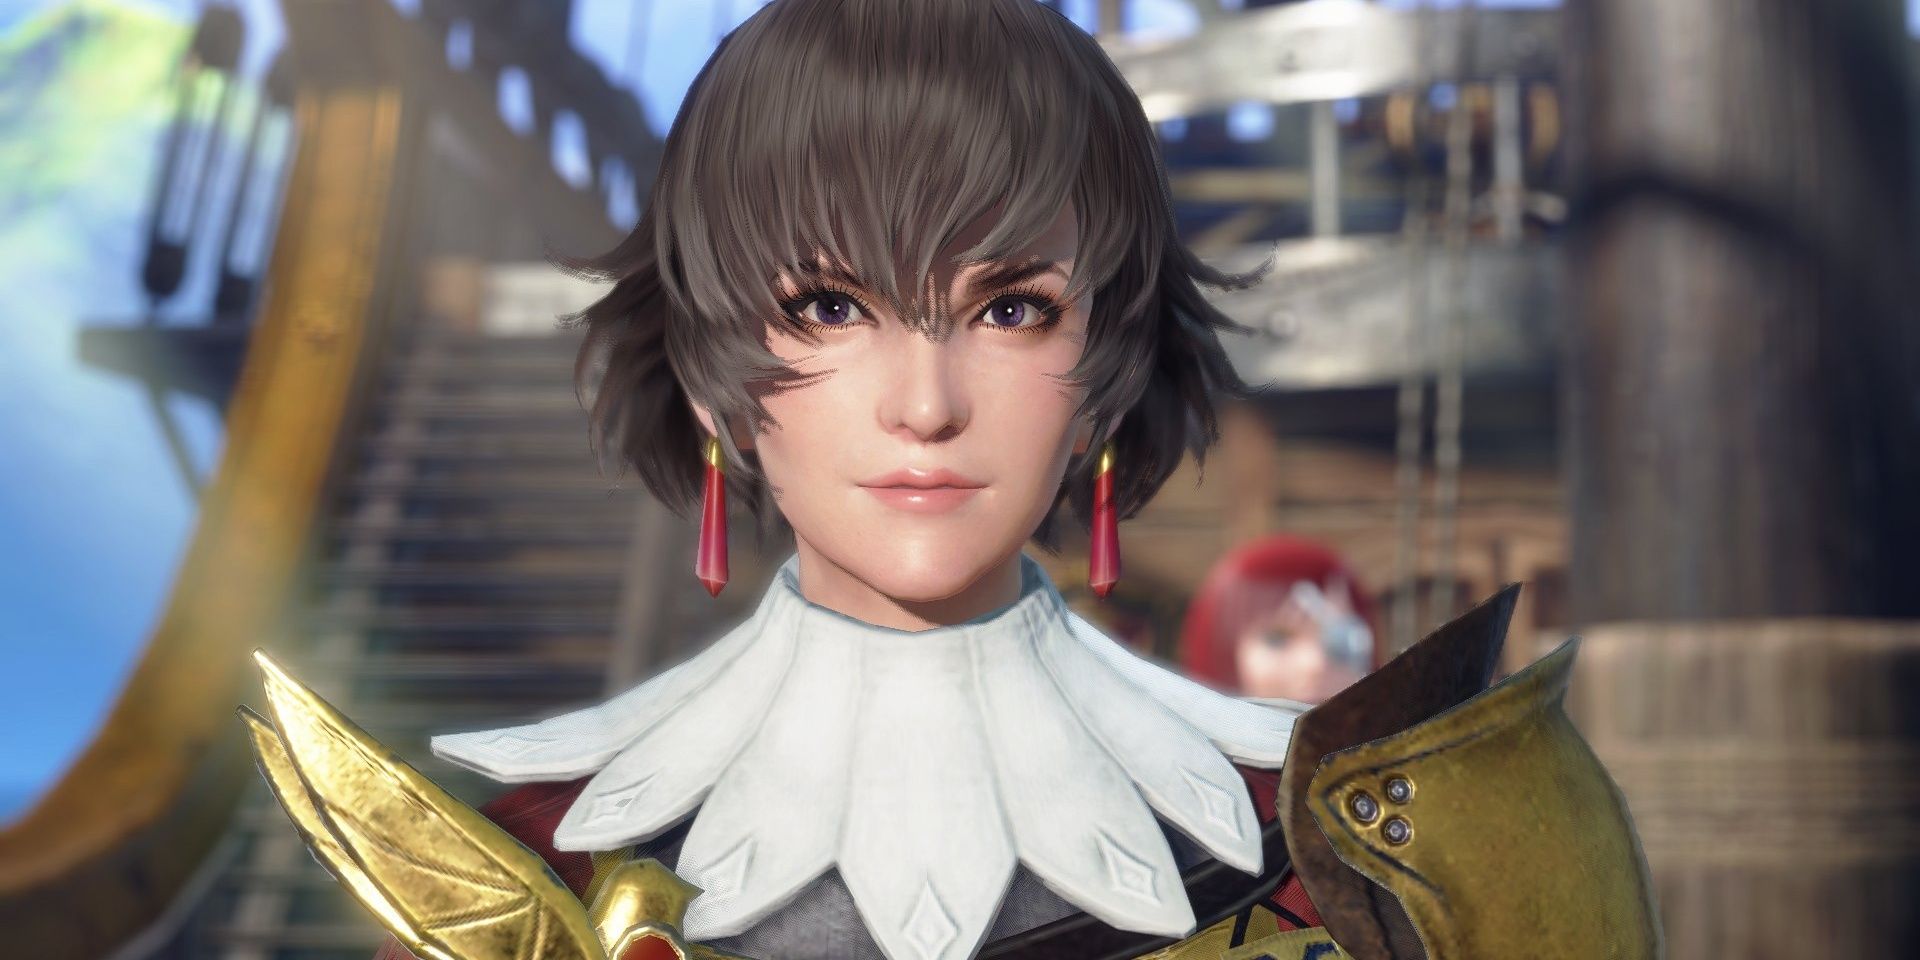 Fiorayne smiling in a cutscene on a boat looking forwards